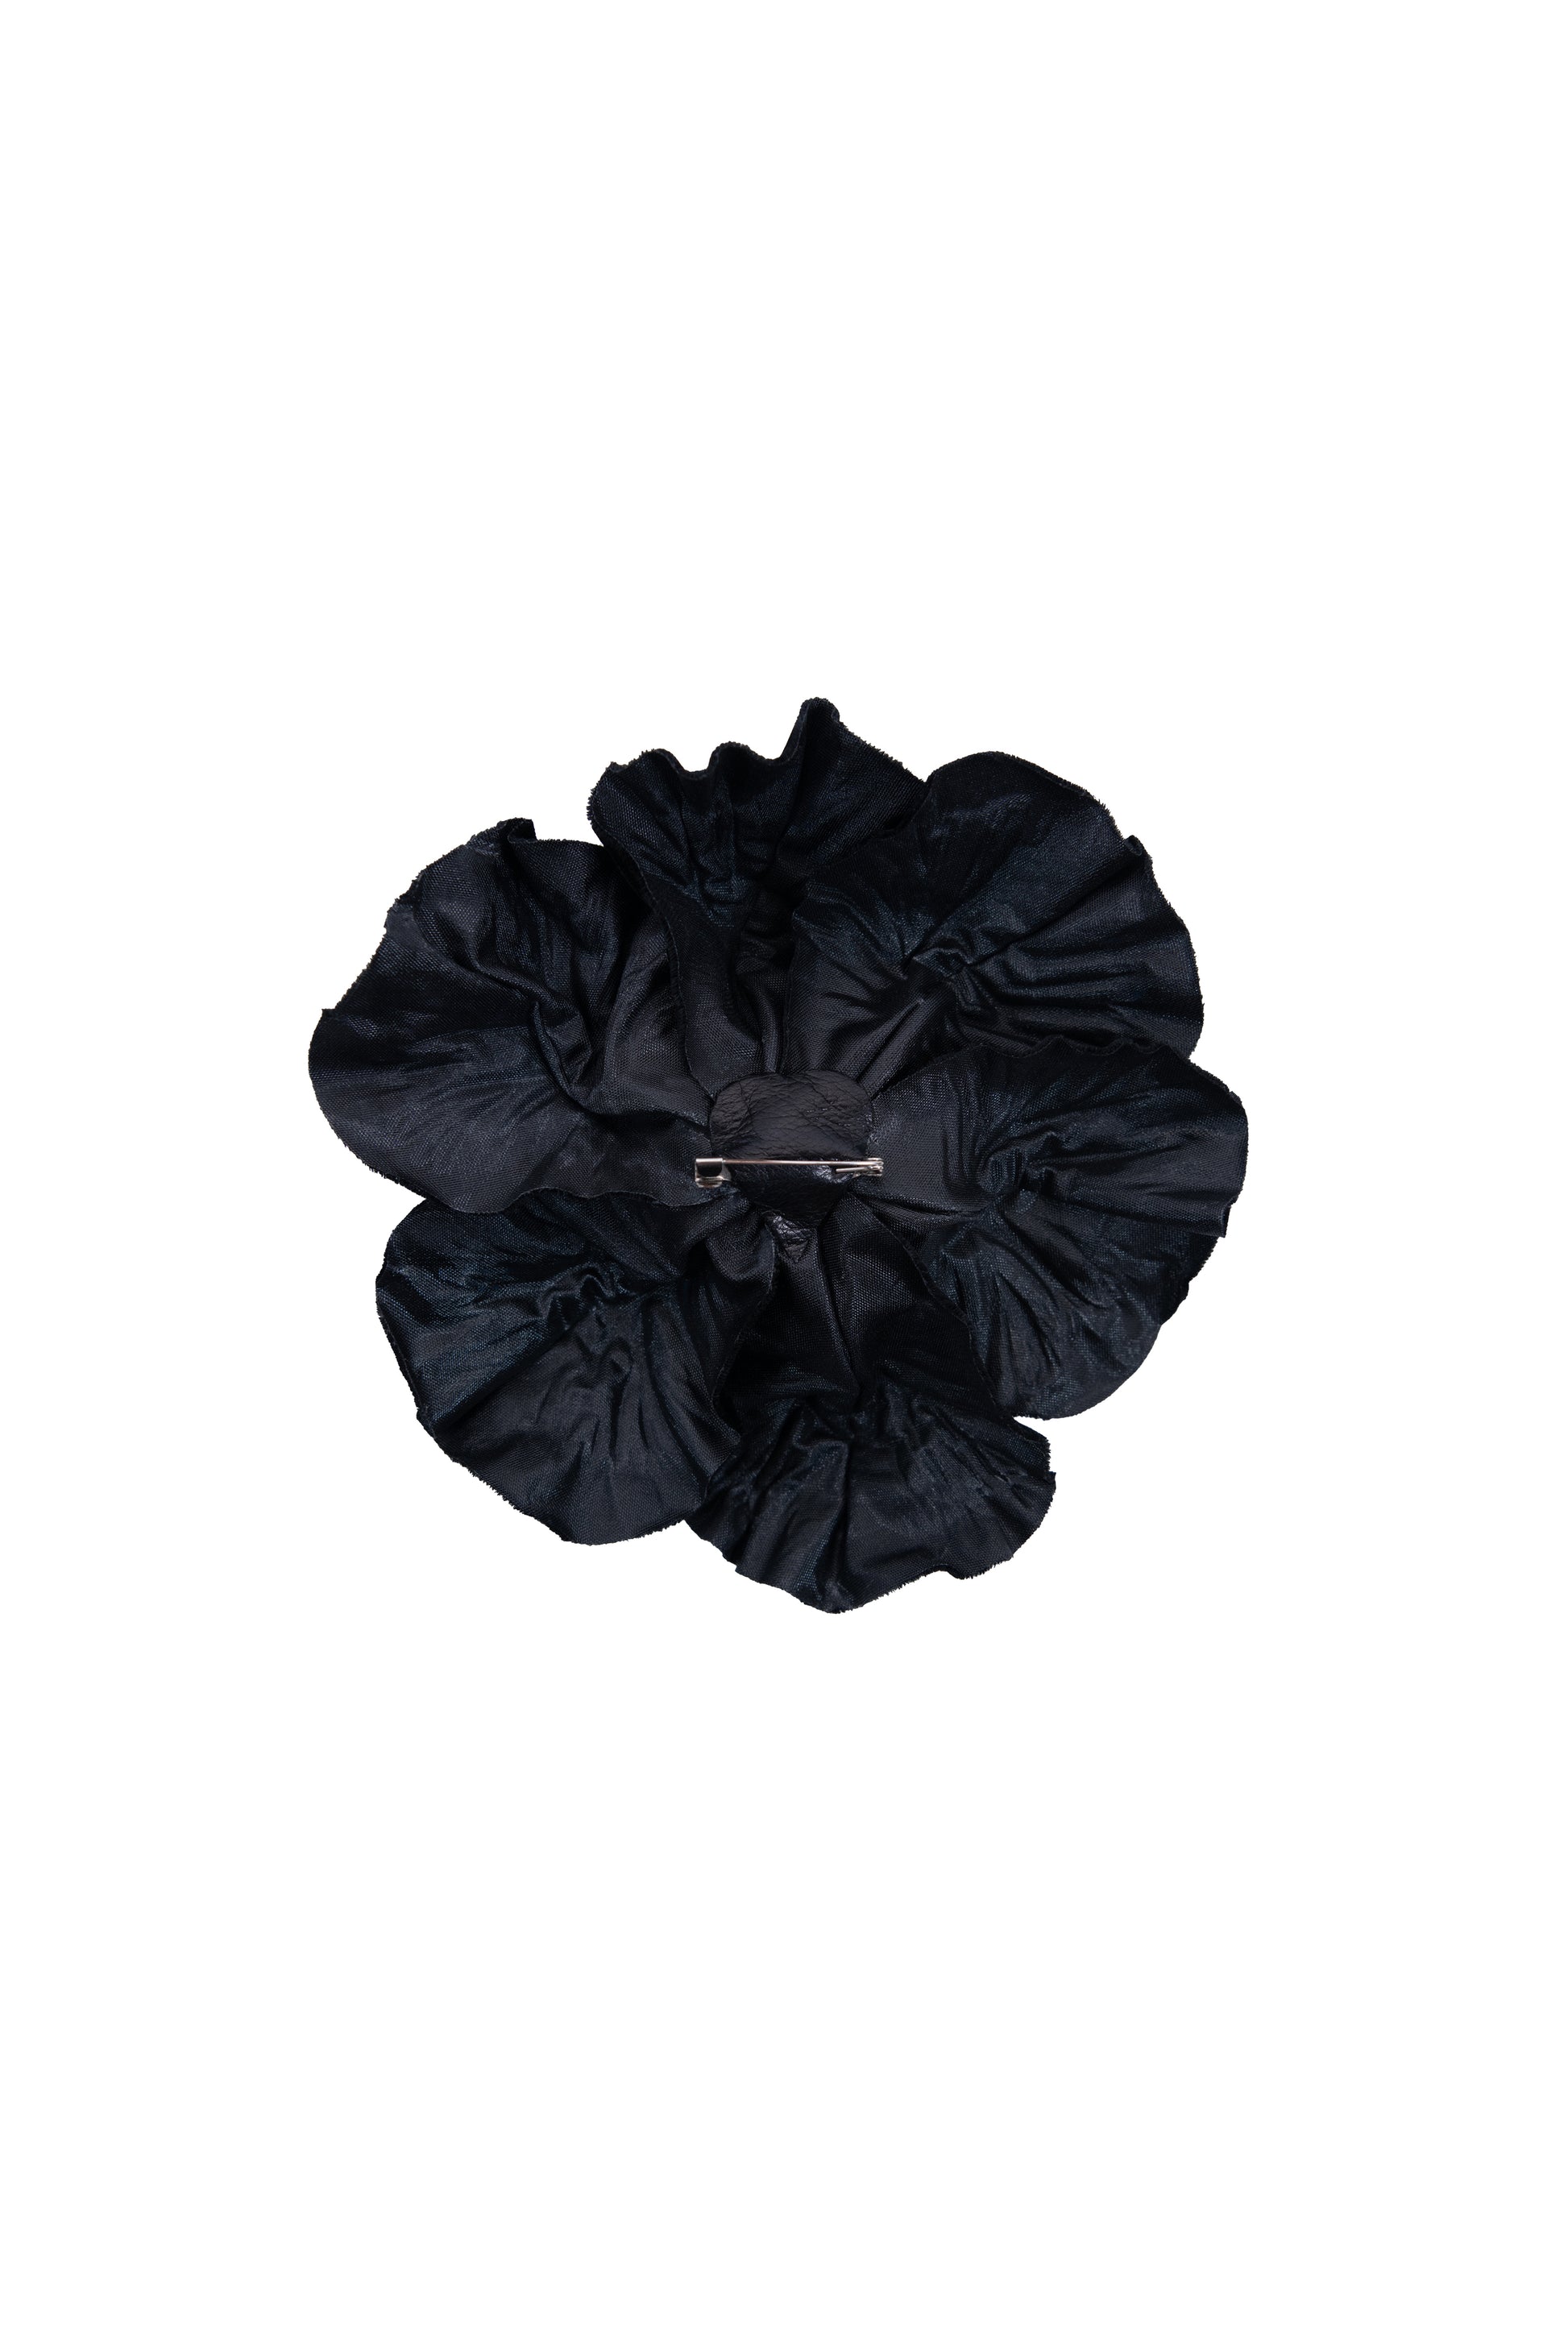 The Irish Twin - Anemone flower Brooch - black velvet fabric - emerald cut crystal embroidered - Made in France - Made in Paris - Handmade in Paris - Designed in Paris - Handcrafted - Be my Guest - Made to love and to last - Unique piece made by hand - original and special for Host Wear by The Irish Twin - created by Jill Bauwens